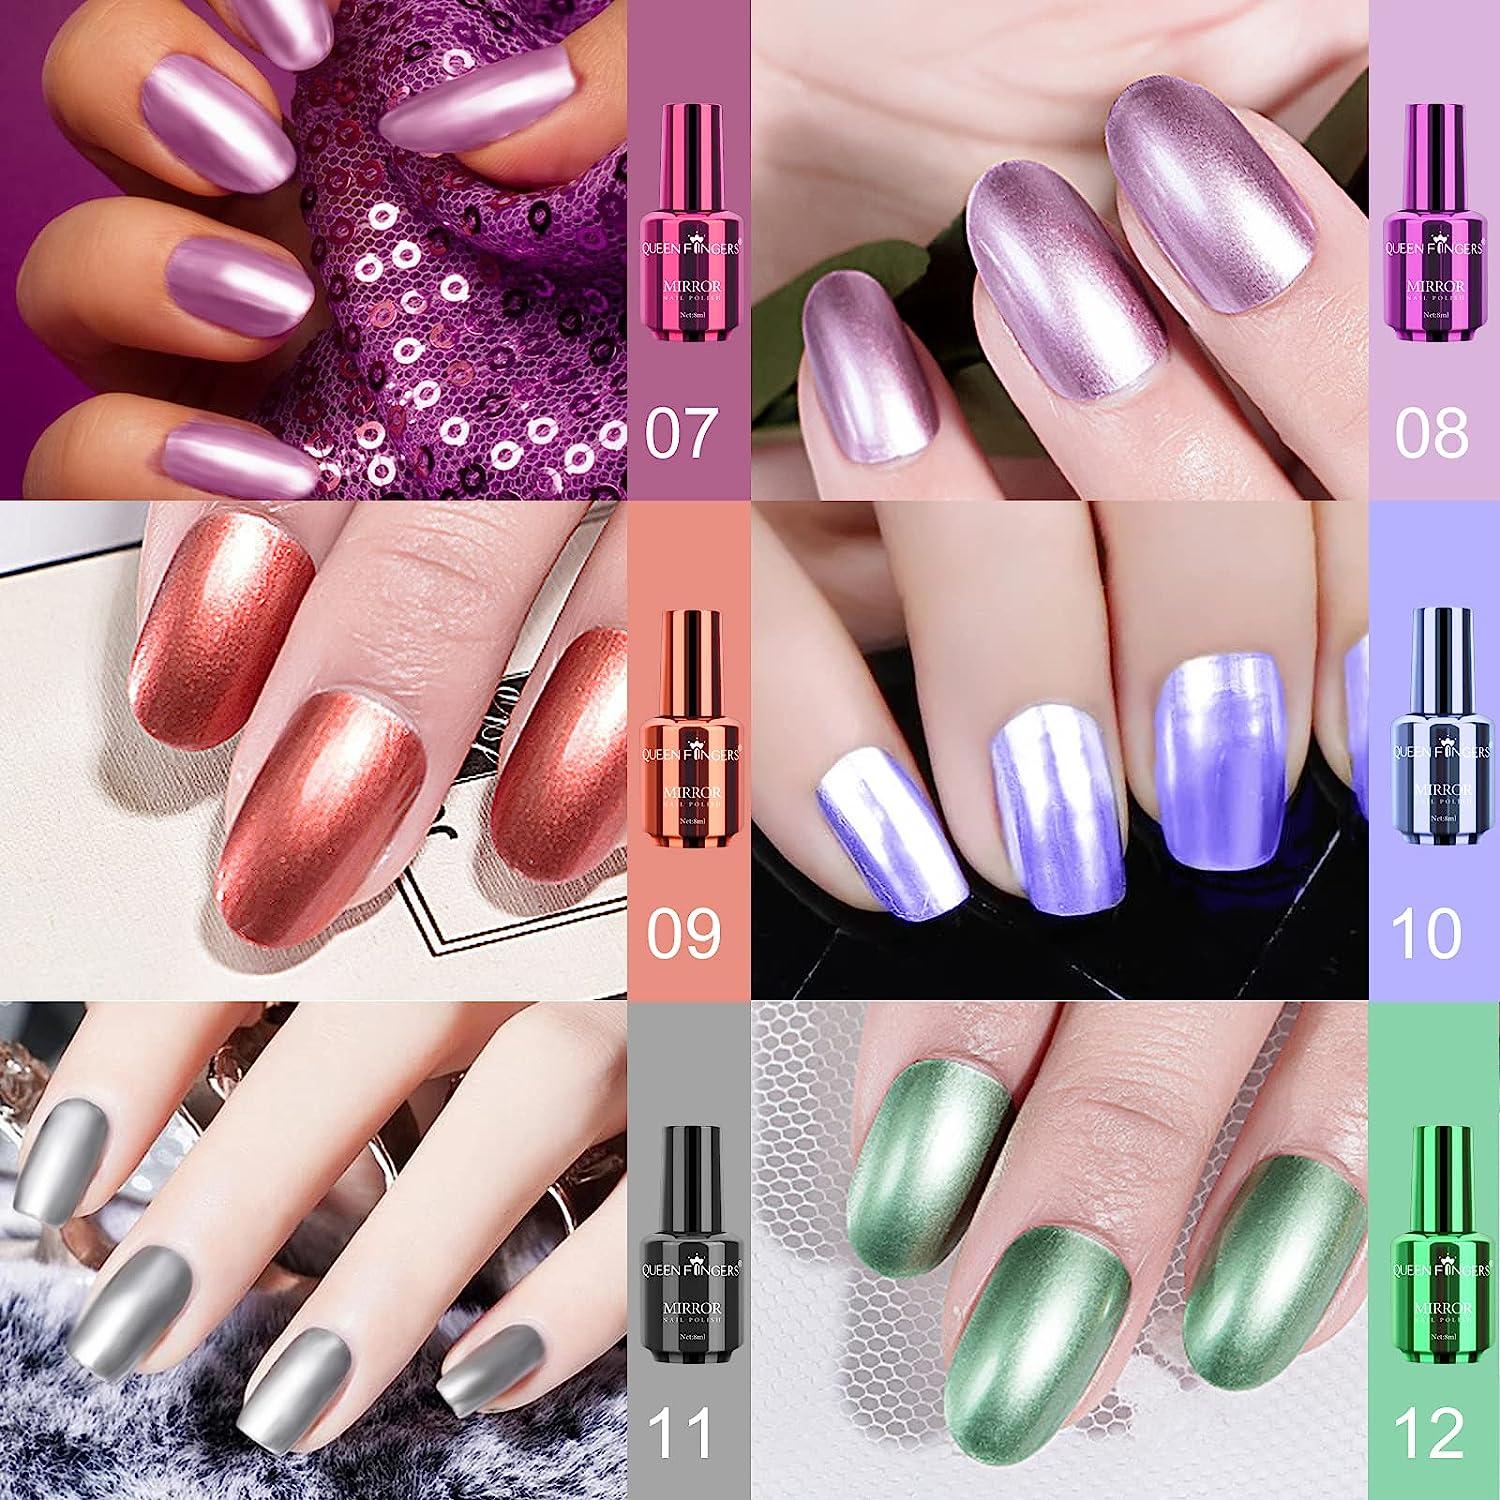 Buy Beromt Mirror Nail Polish Multicolor, Metallic Chrome Nail Polish Set  of 2-304,303 Online at Low Prices in India - Amazon.in